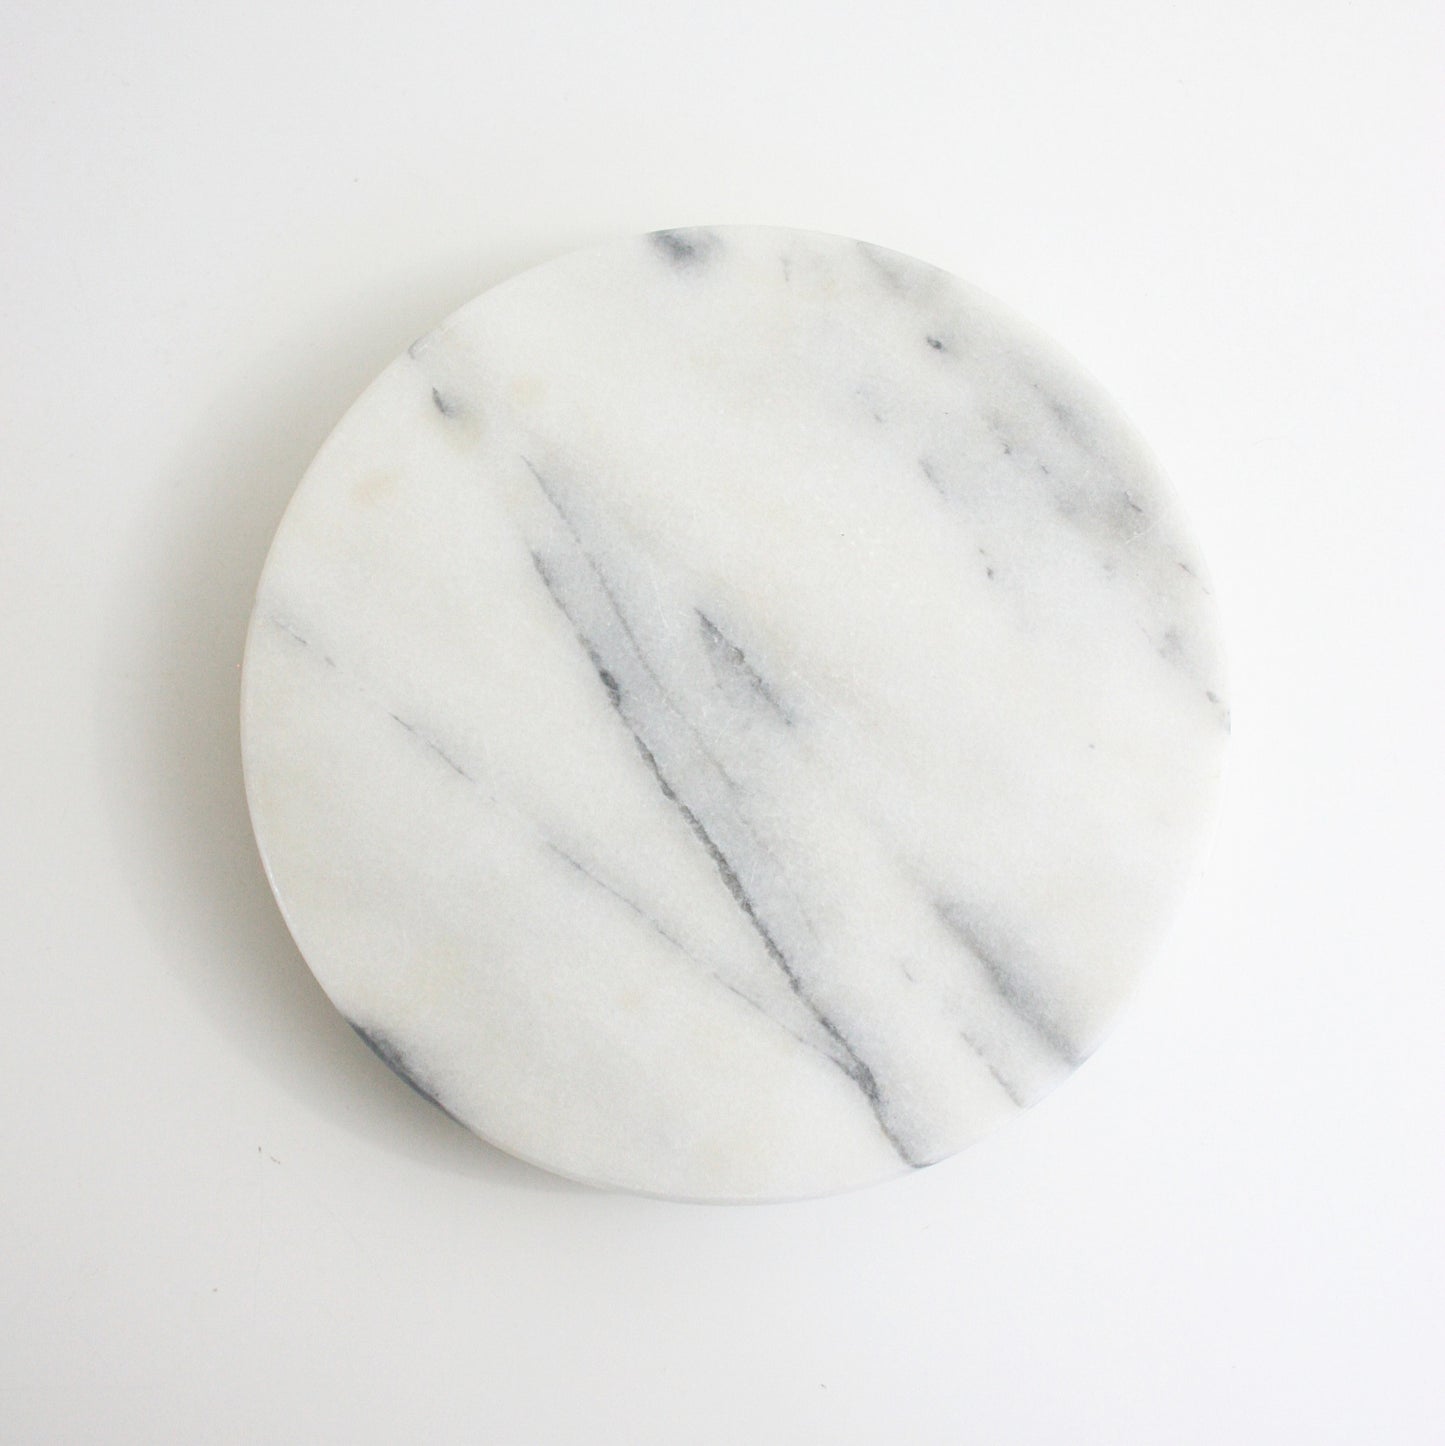 SOLD - Vintage Solid Marble Lazy Susan / Vintage White Marble Tray